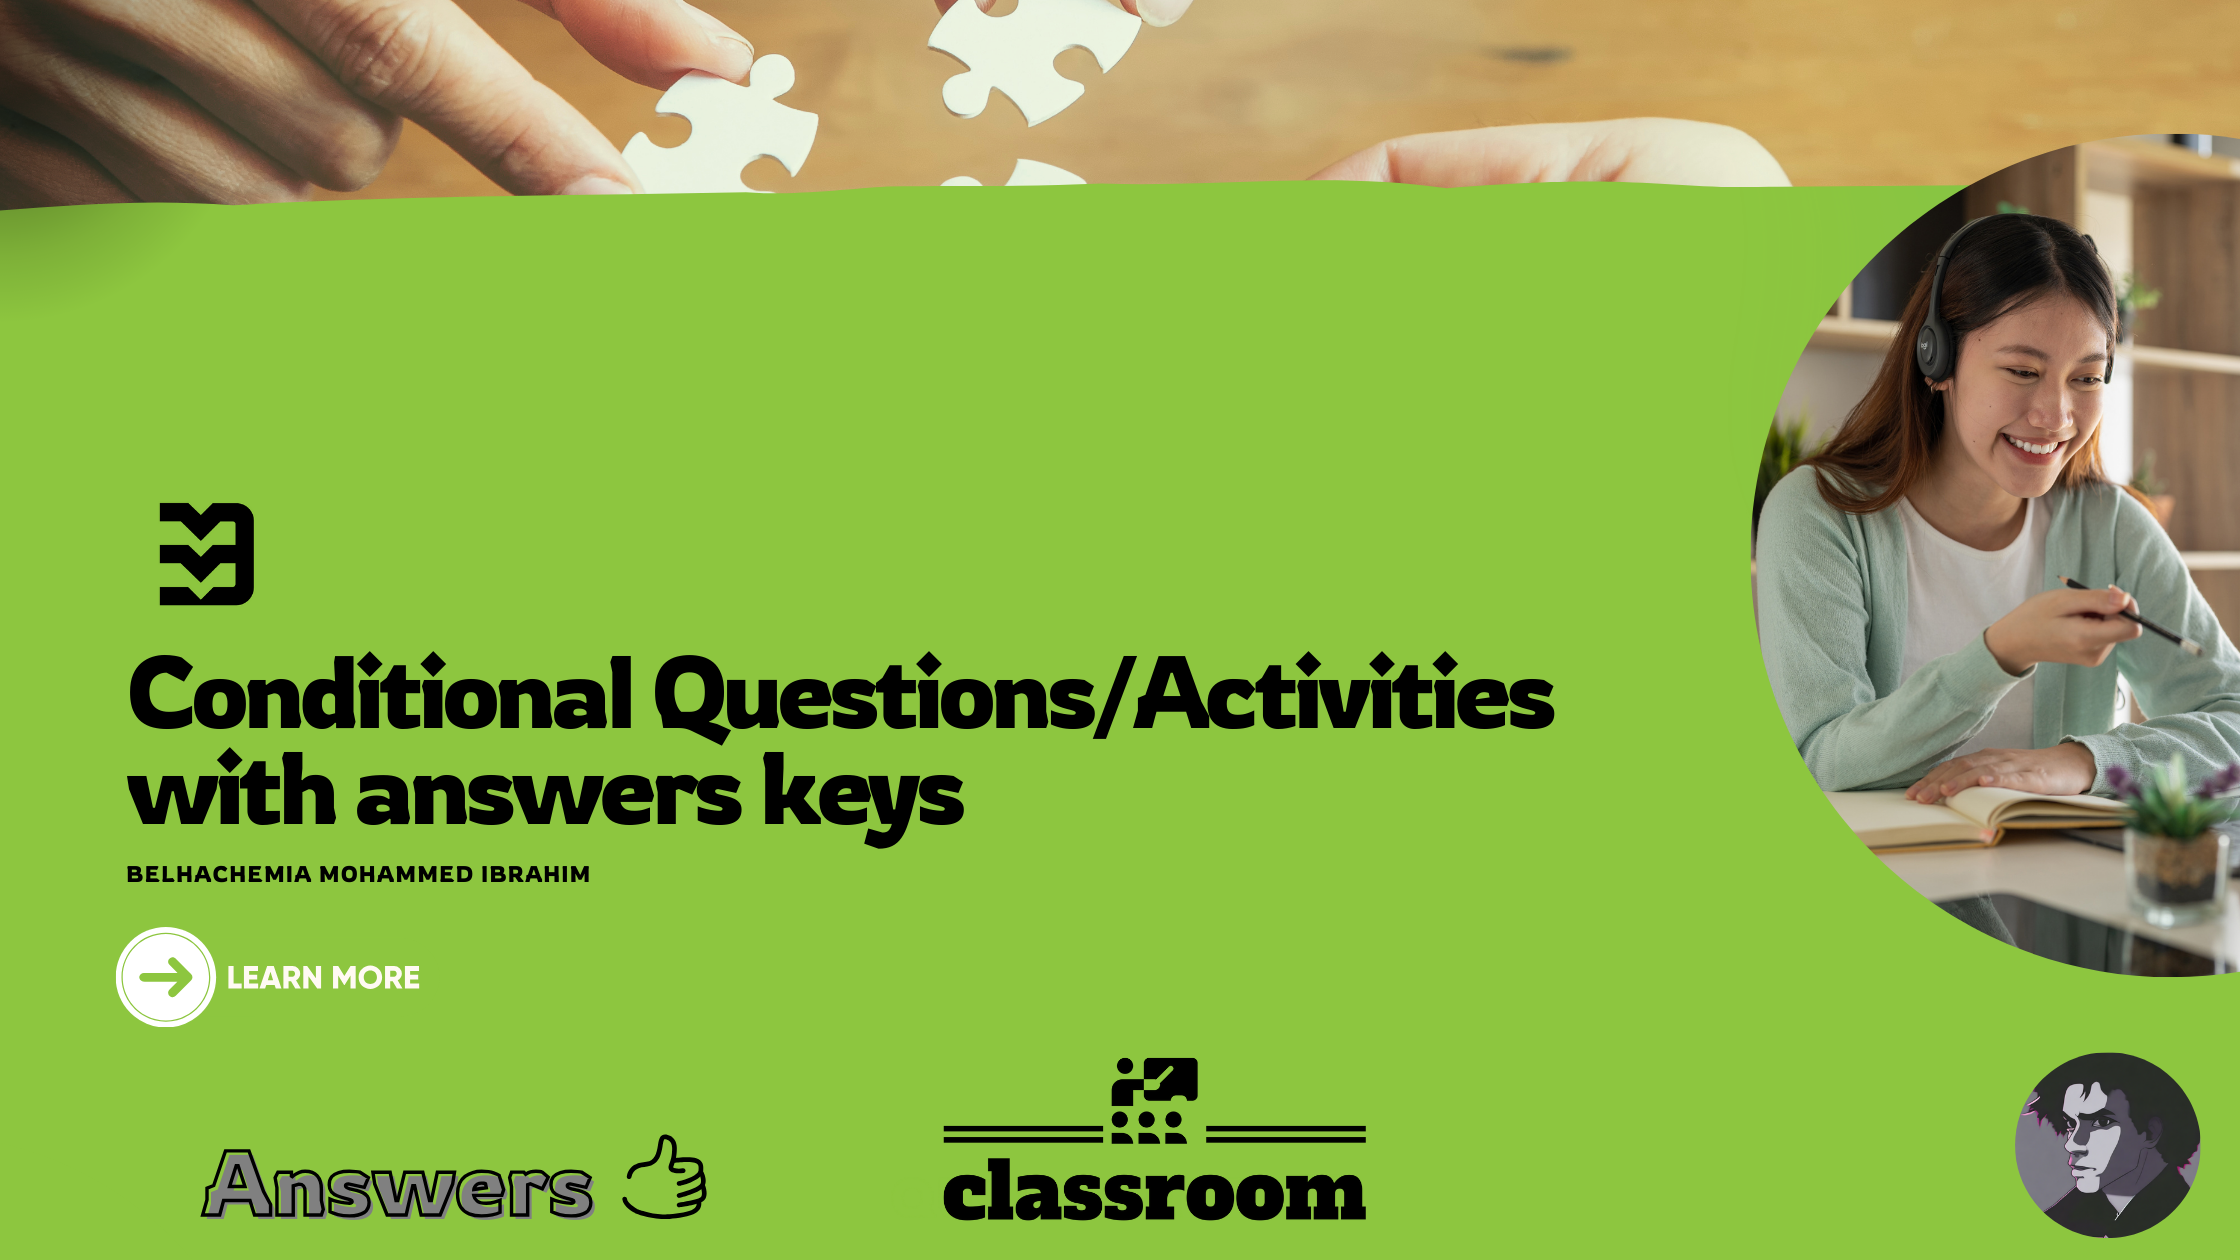 Conditional Questions/Activities with answer keys PART II